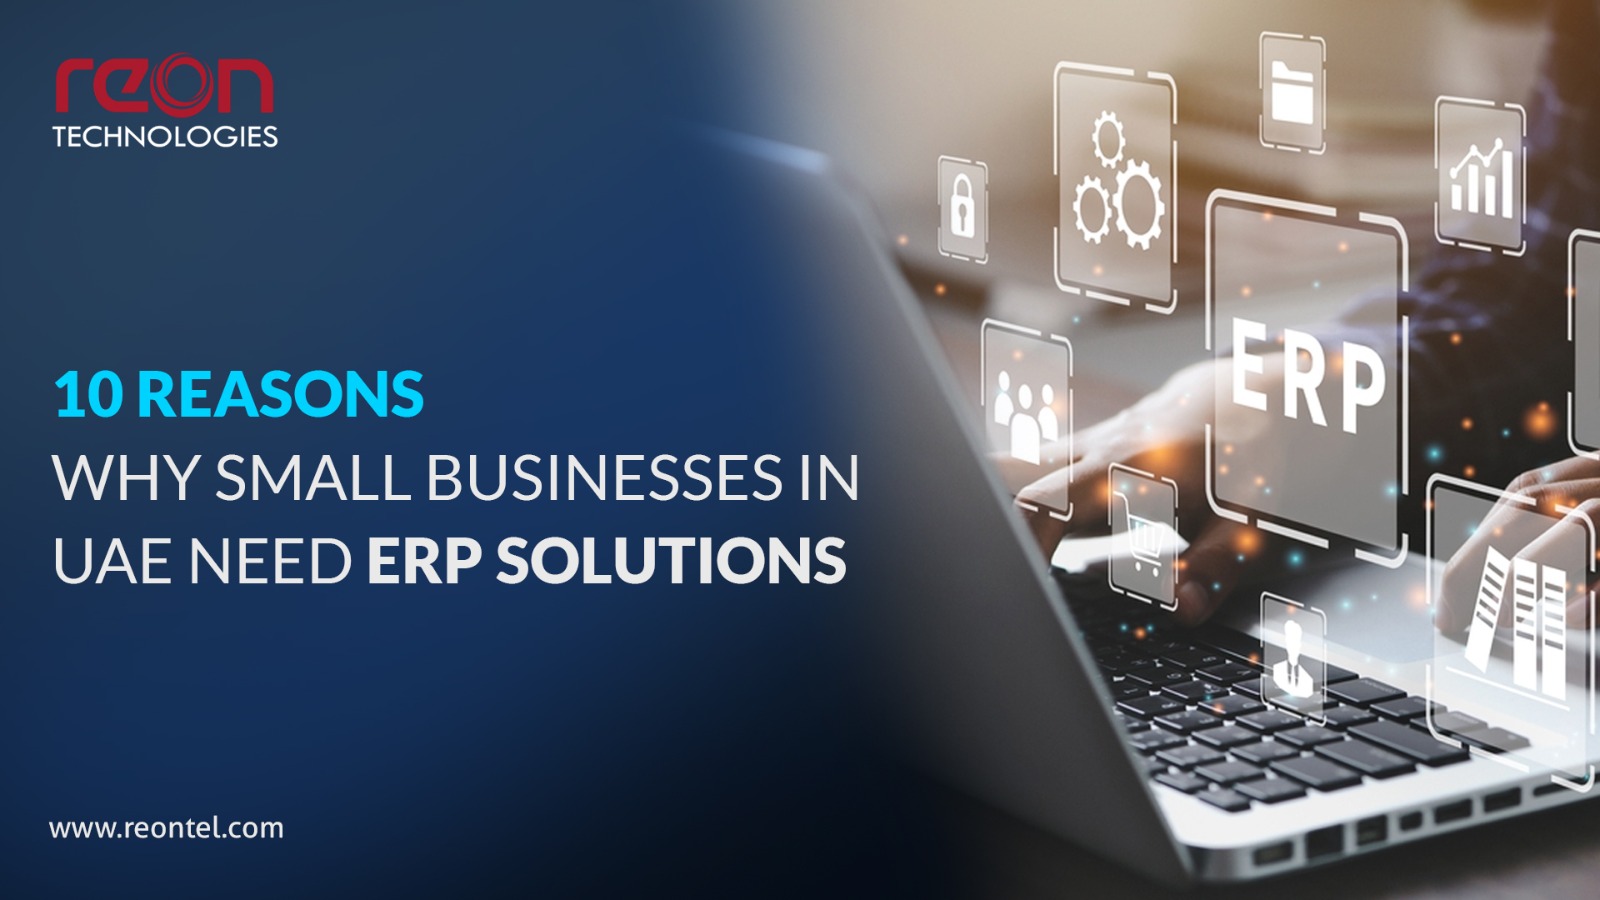 Reasons why small business uae in ERP solutions